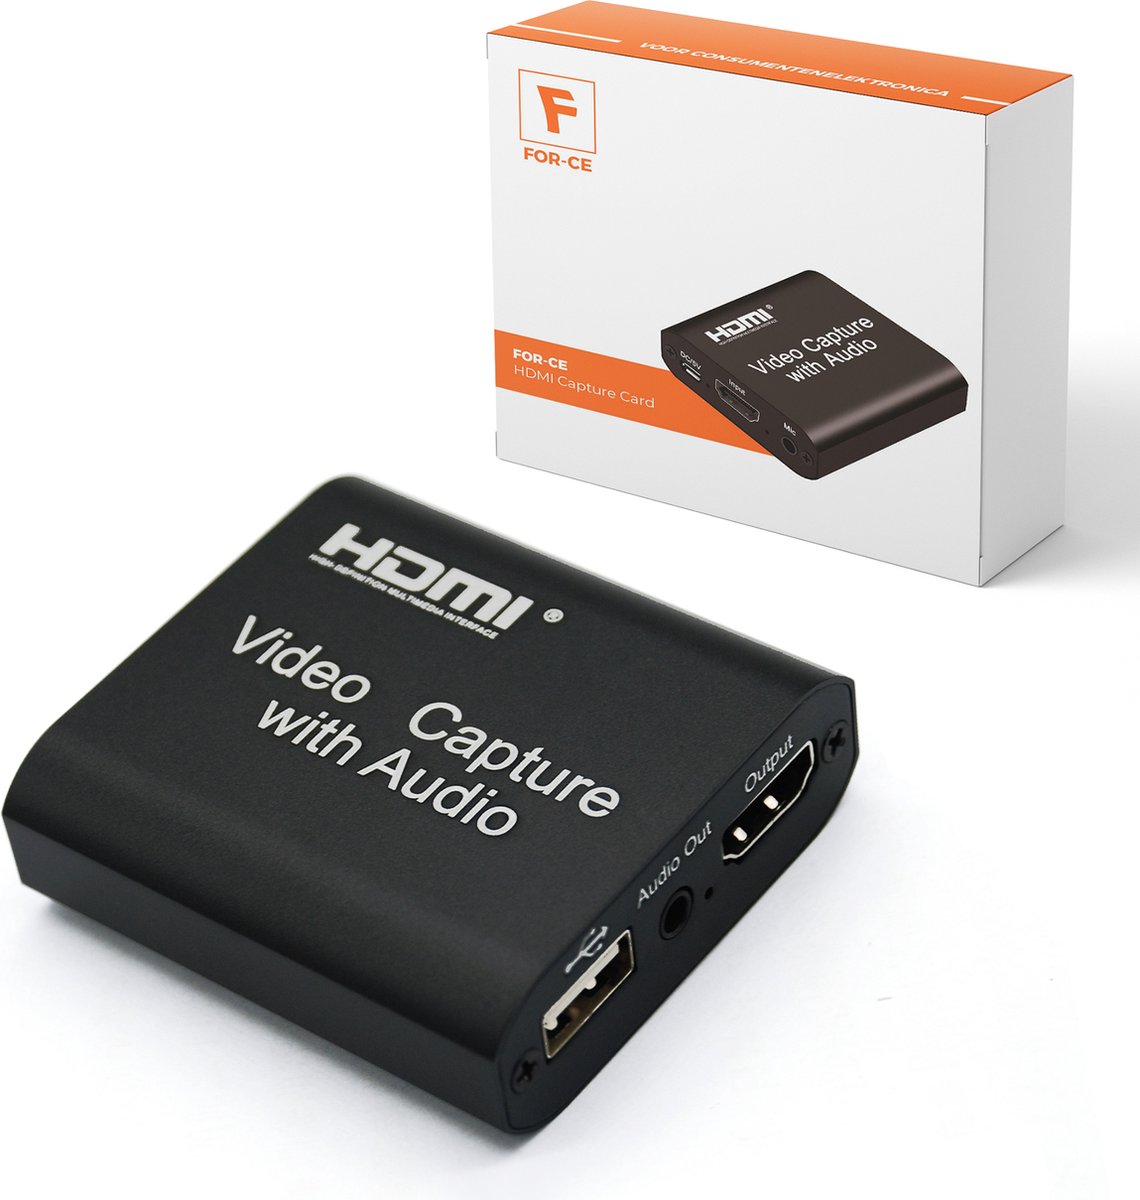 5. Force HDMI Capture Card /